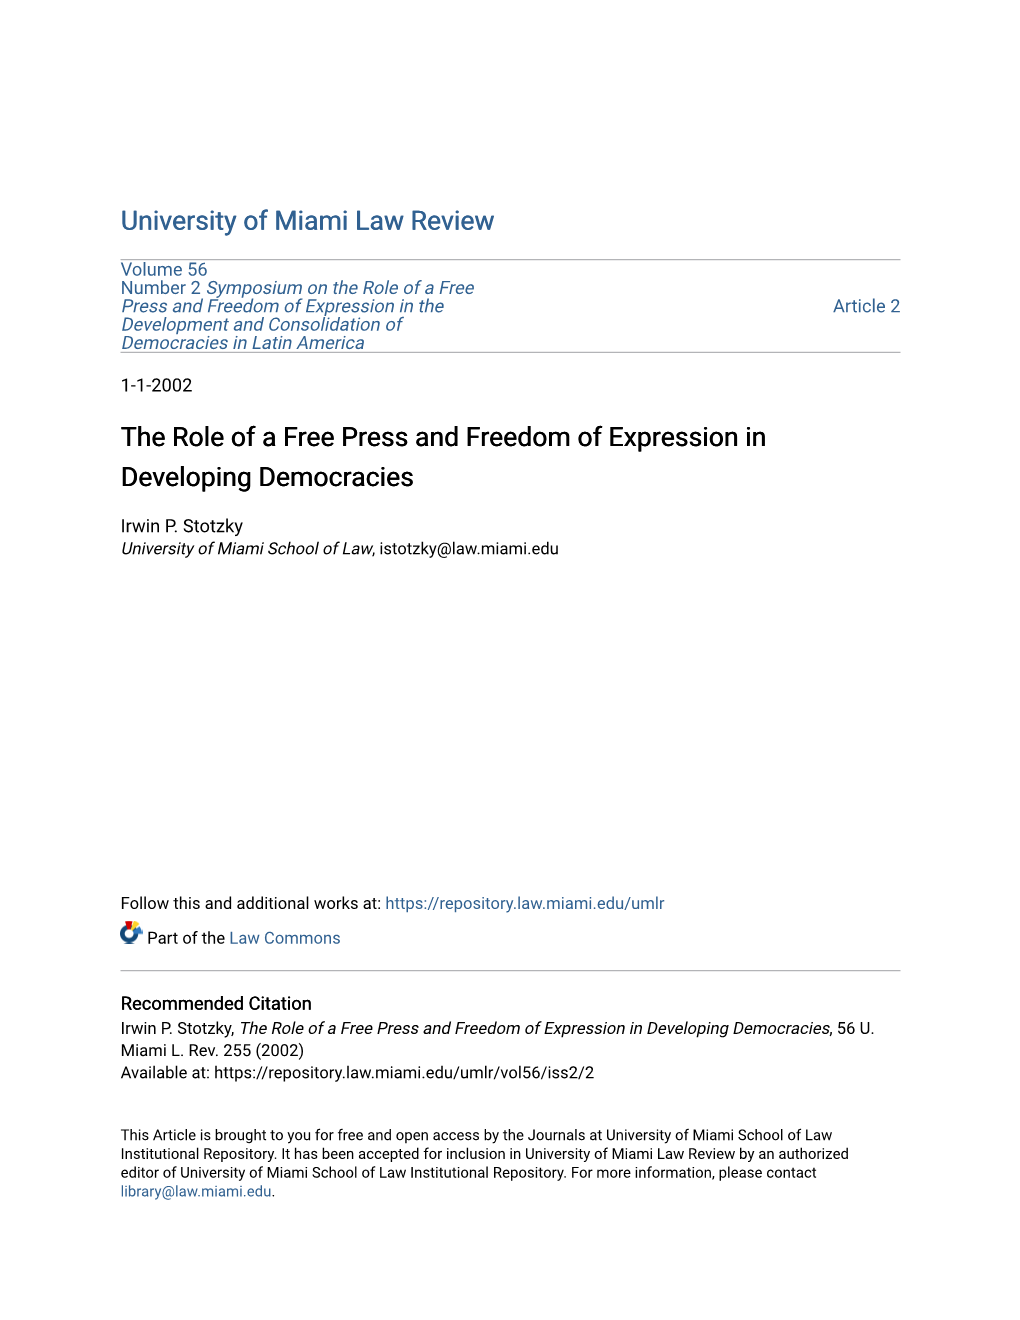 The Role of a Free Press and Freedom of Expression in Developing Democracies